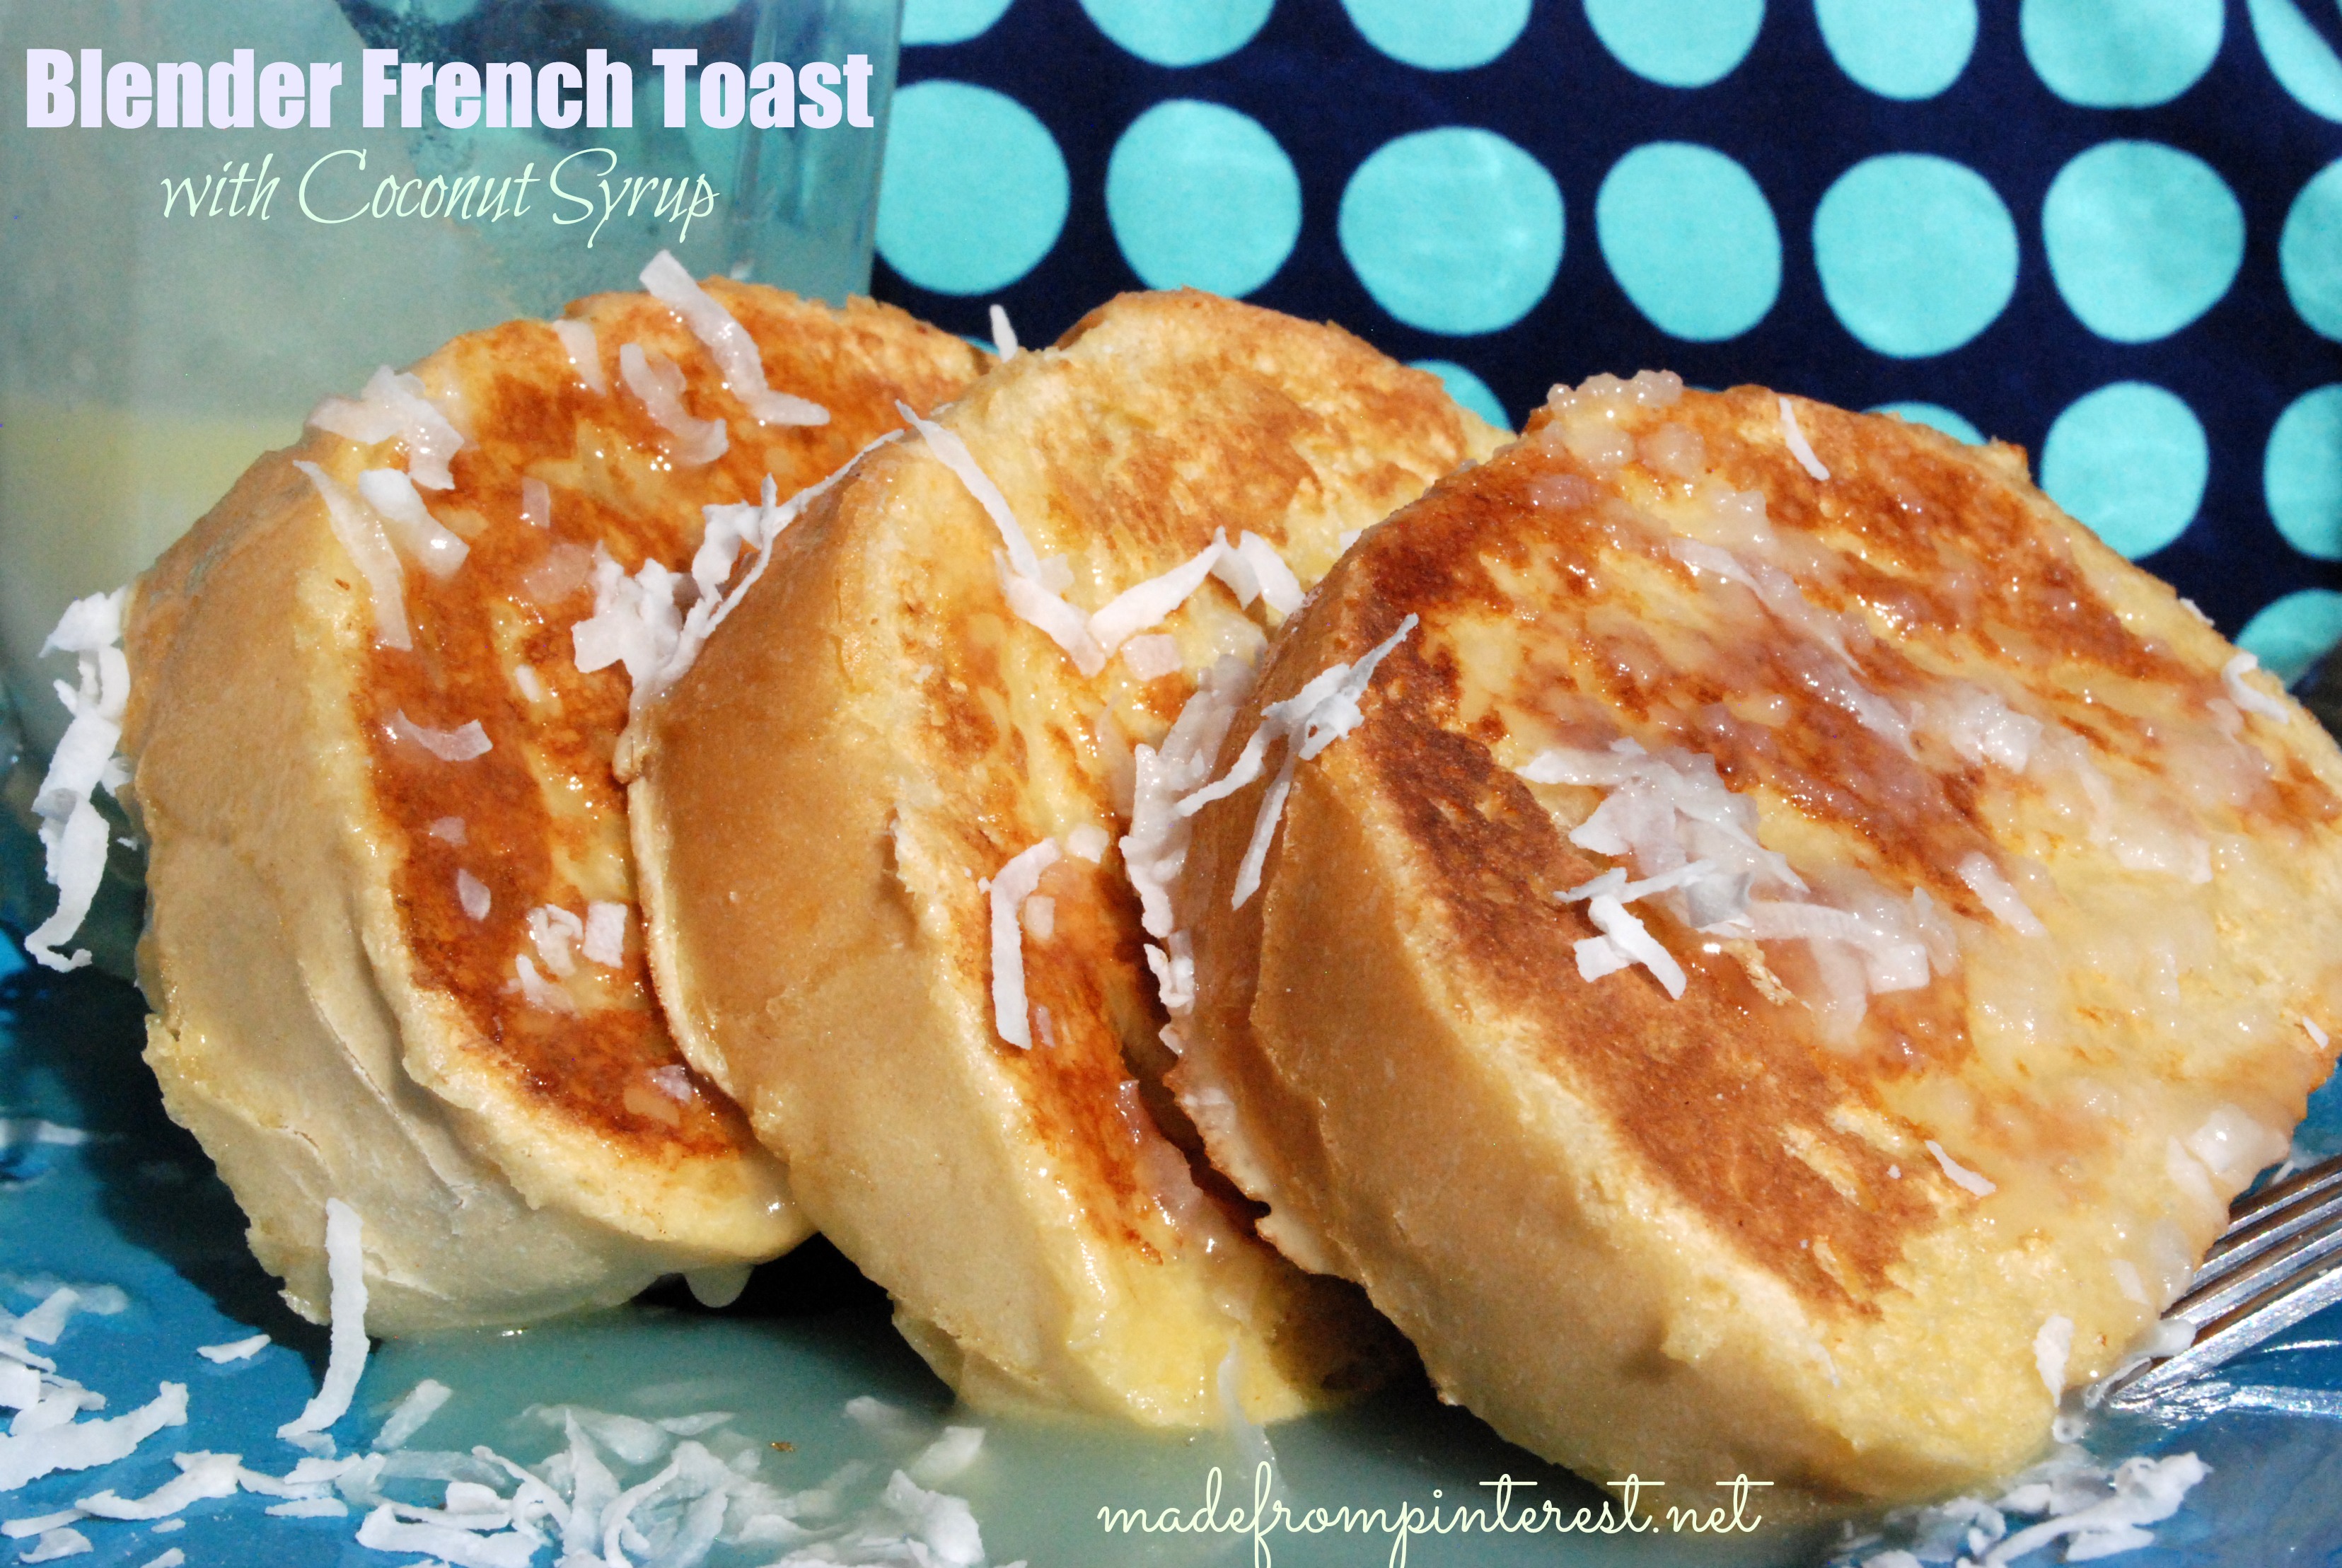 Blender French Toast with Coconut Syrup